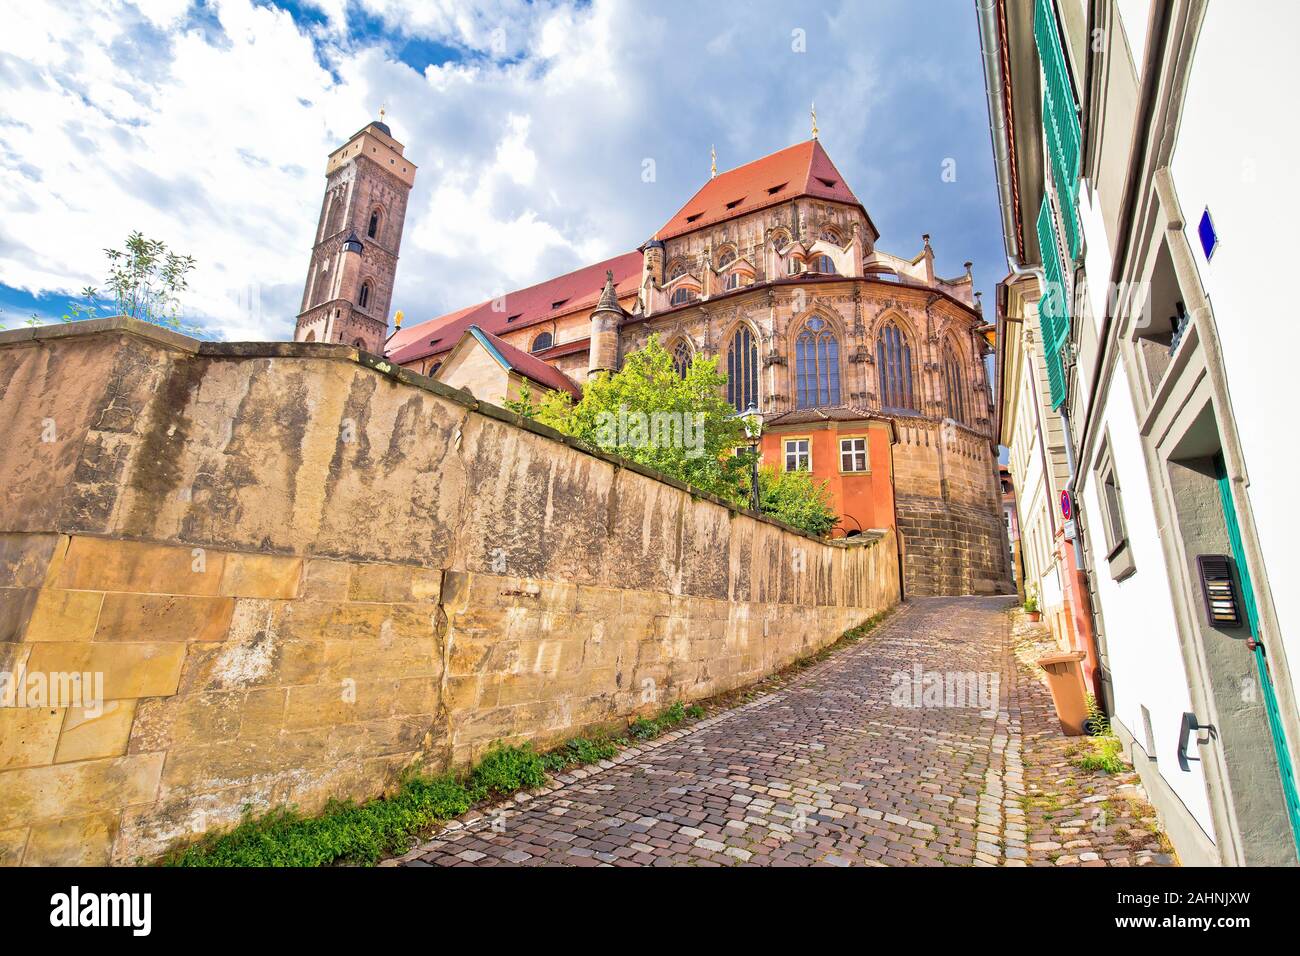 Bamberger Dom or Bamberg church tower and streets of old town view, Bavaria region of Germany Stock Photo